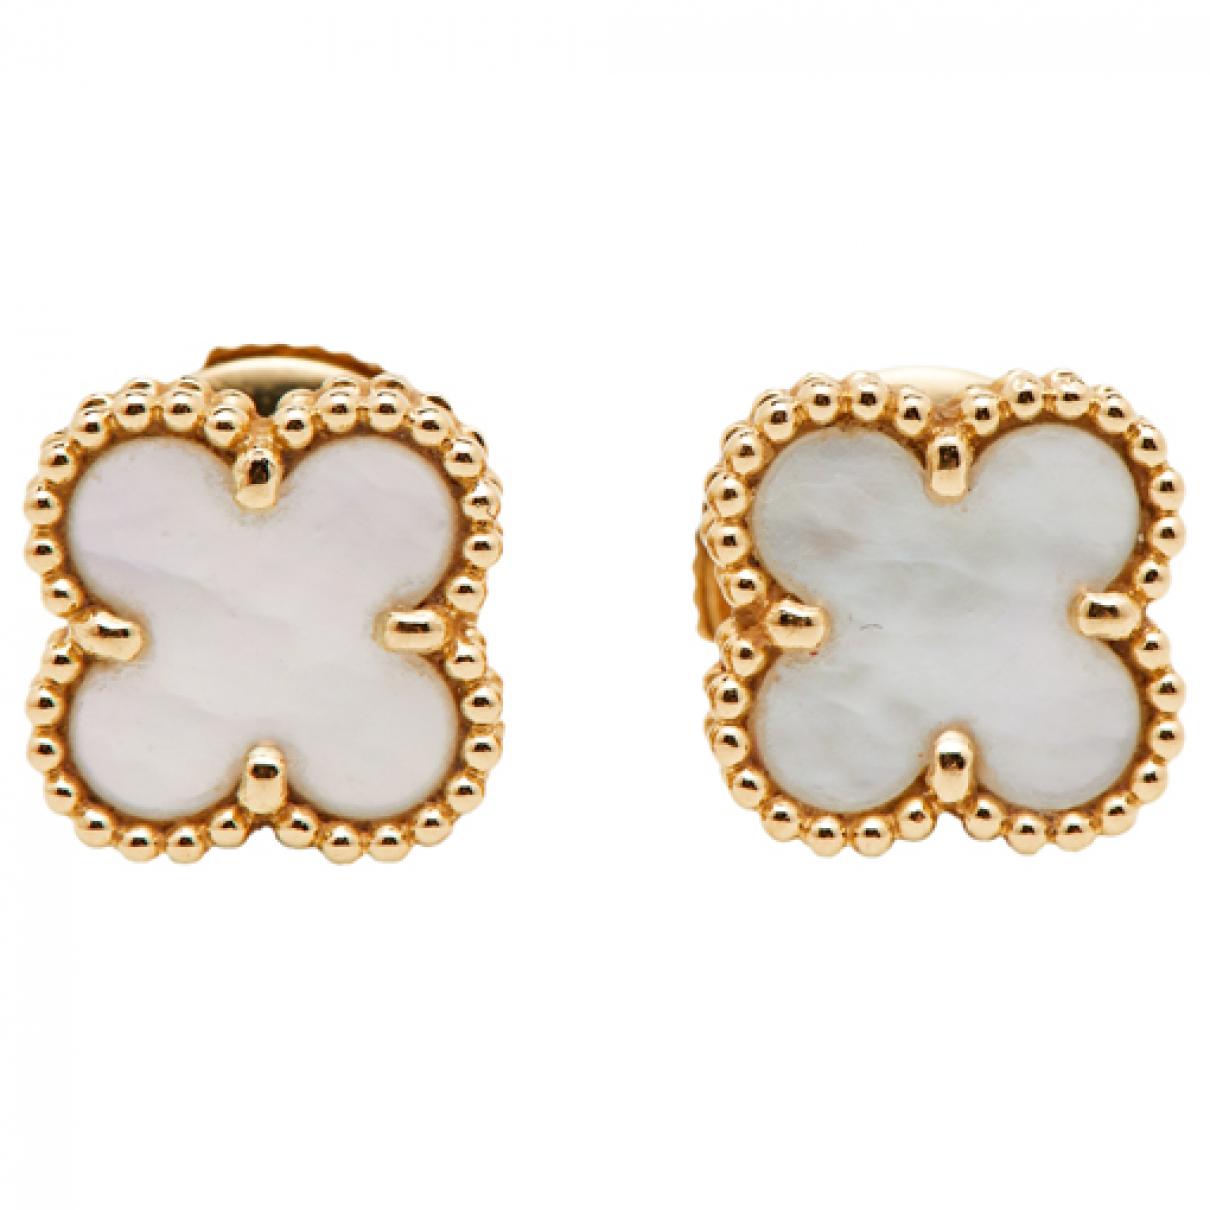 Louis Vuitton Color Blossom Earrings Yellow and White Gold and PavÃ Diamond